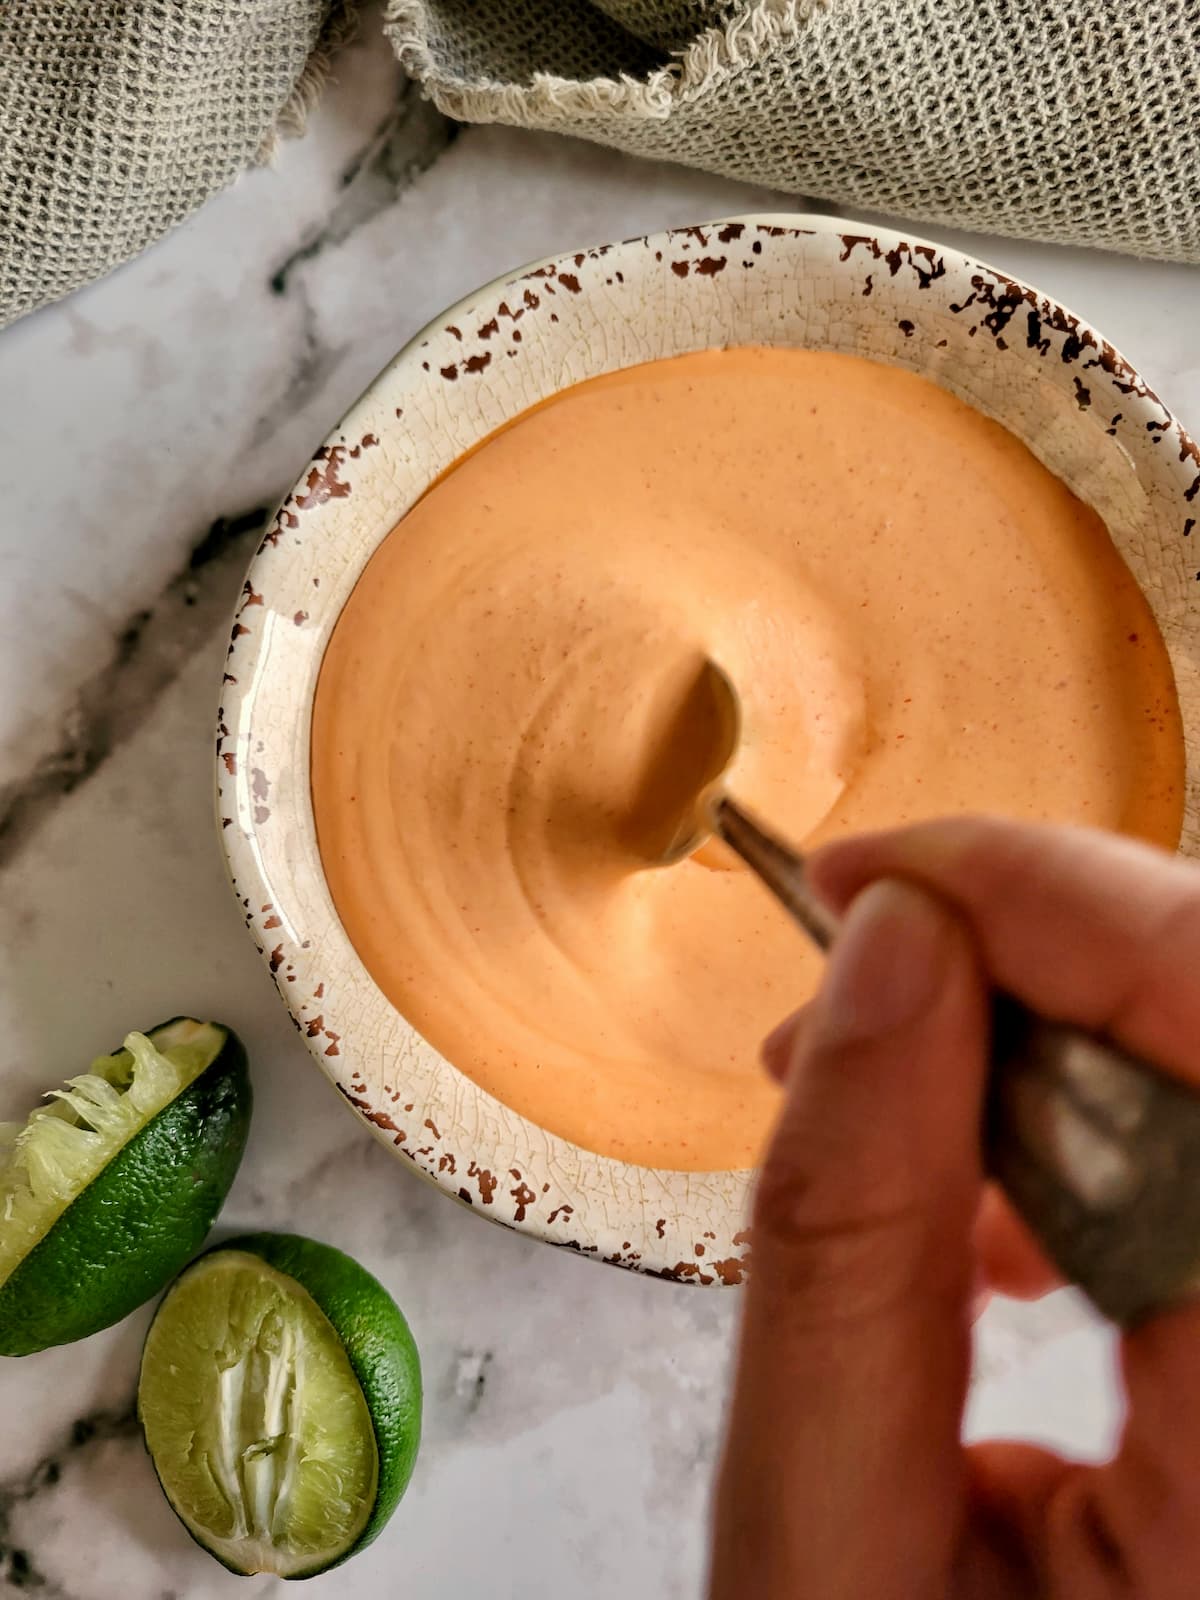 hand stirring an orange sauce in a bowl, limes in the background